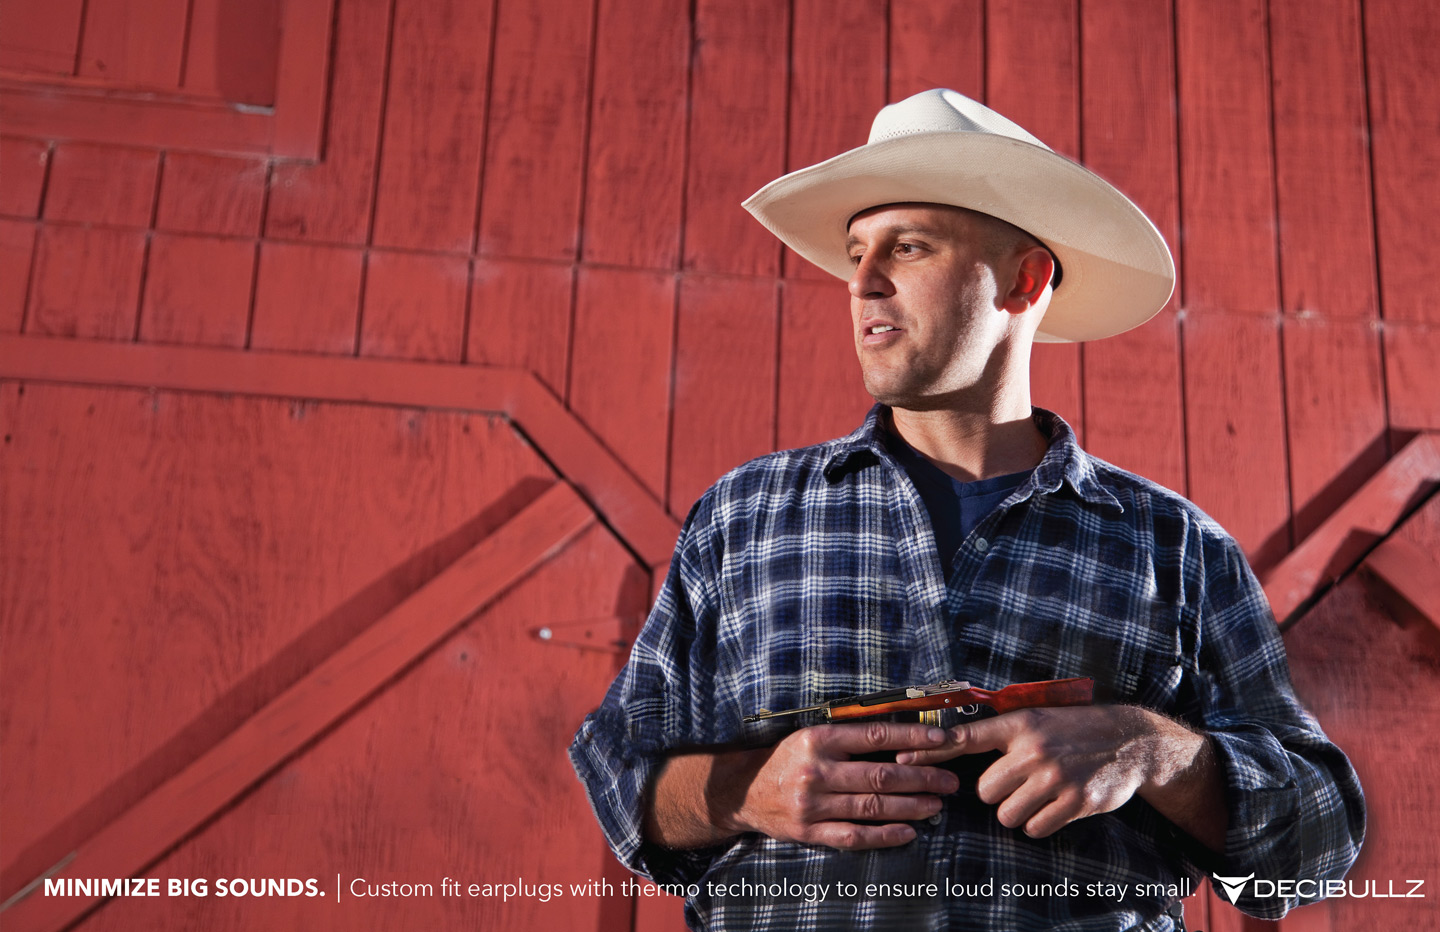 Ad with man with cowboy hat